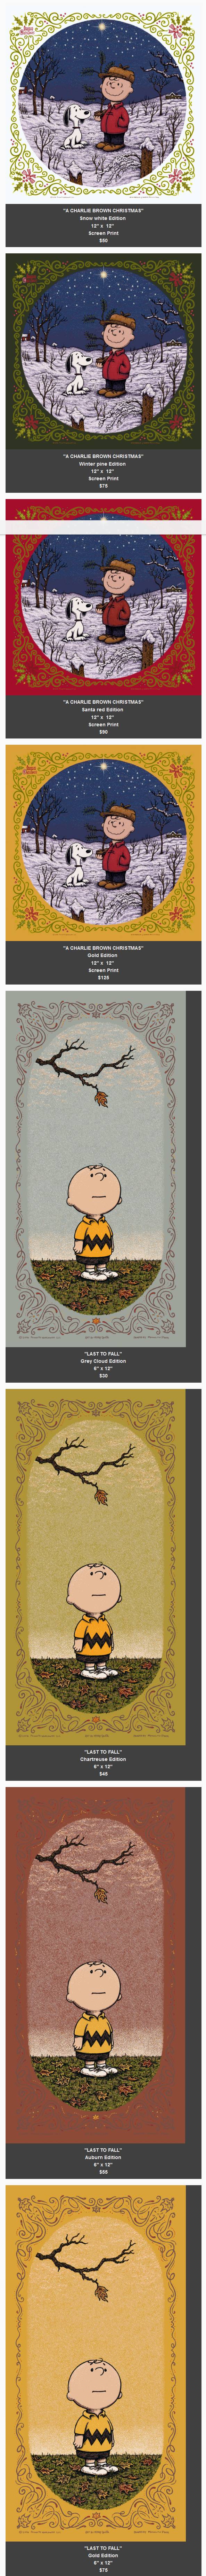 dhm_s_official_peanuts_marq_spusta_a_charlie_brown_christmas__last_to_fall_prints_now_up_and_avail_-_2016-12-13_23-20-33